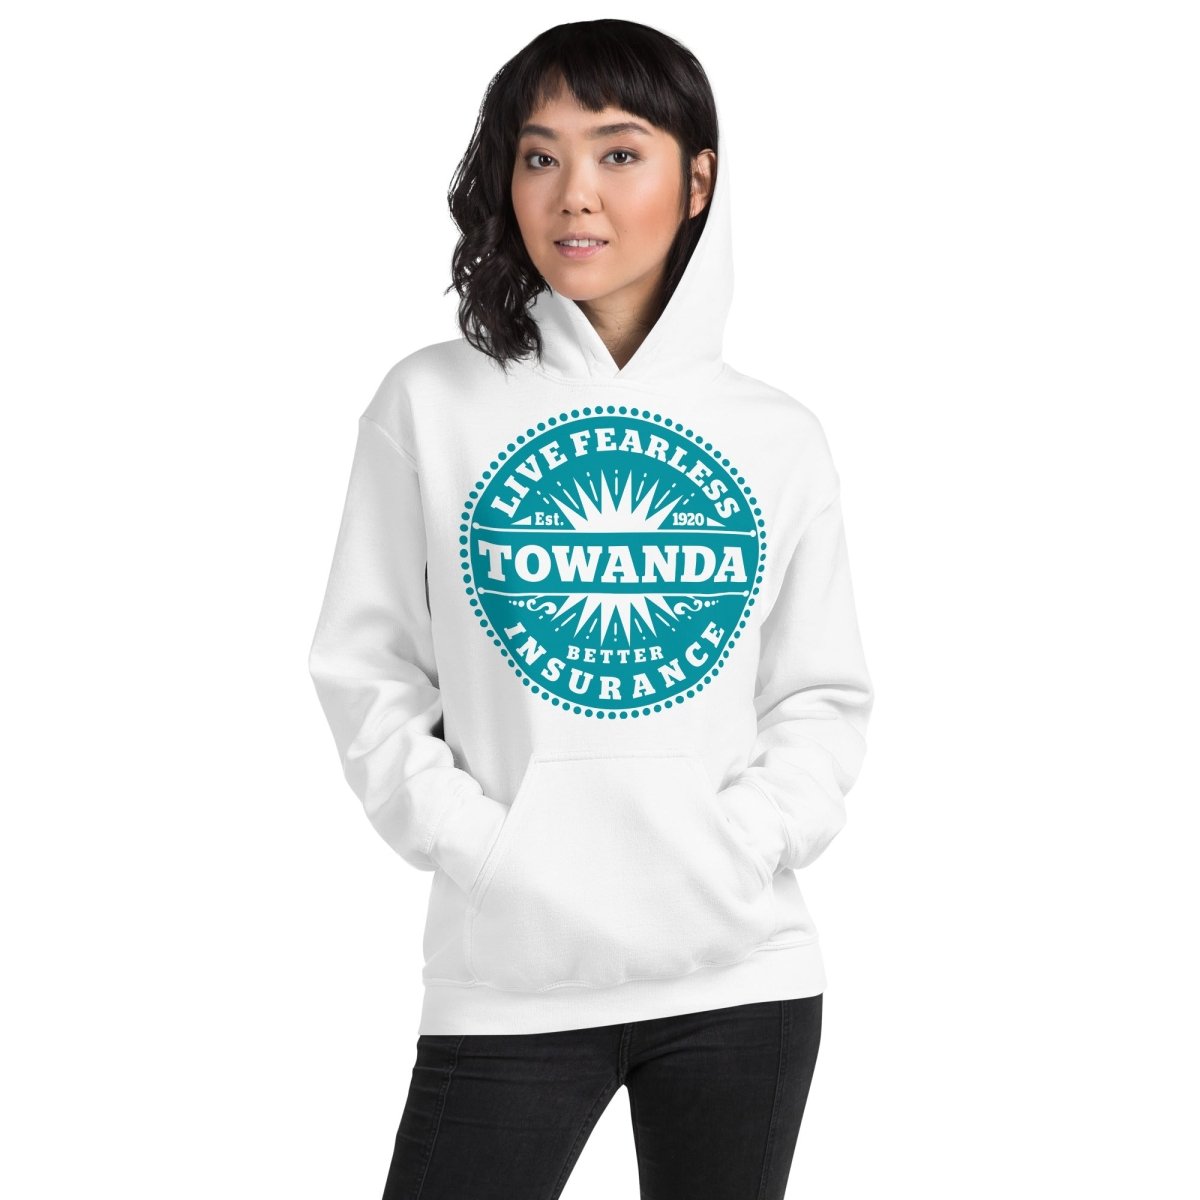 Towanda Fleece Hoodie, Live Fearless, Your Insurance For Chilly Days